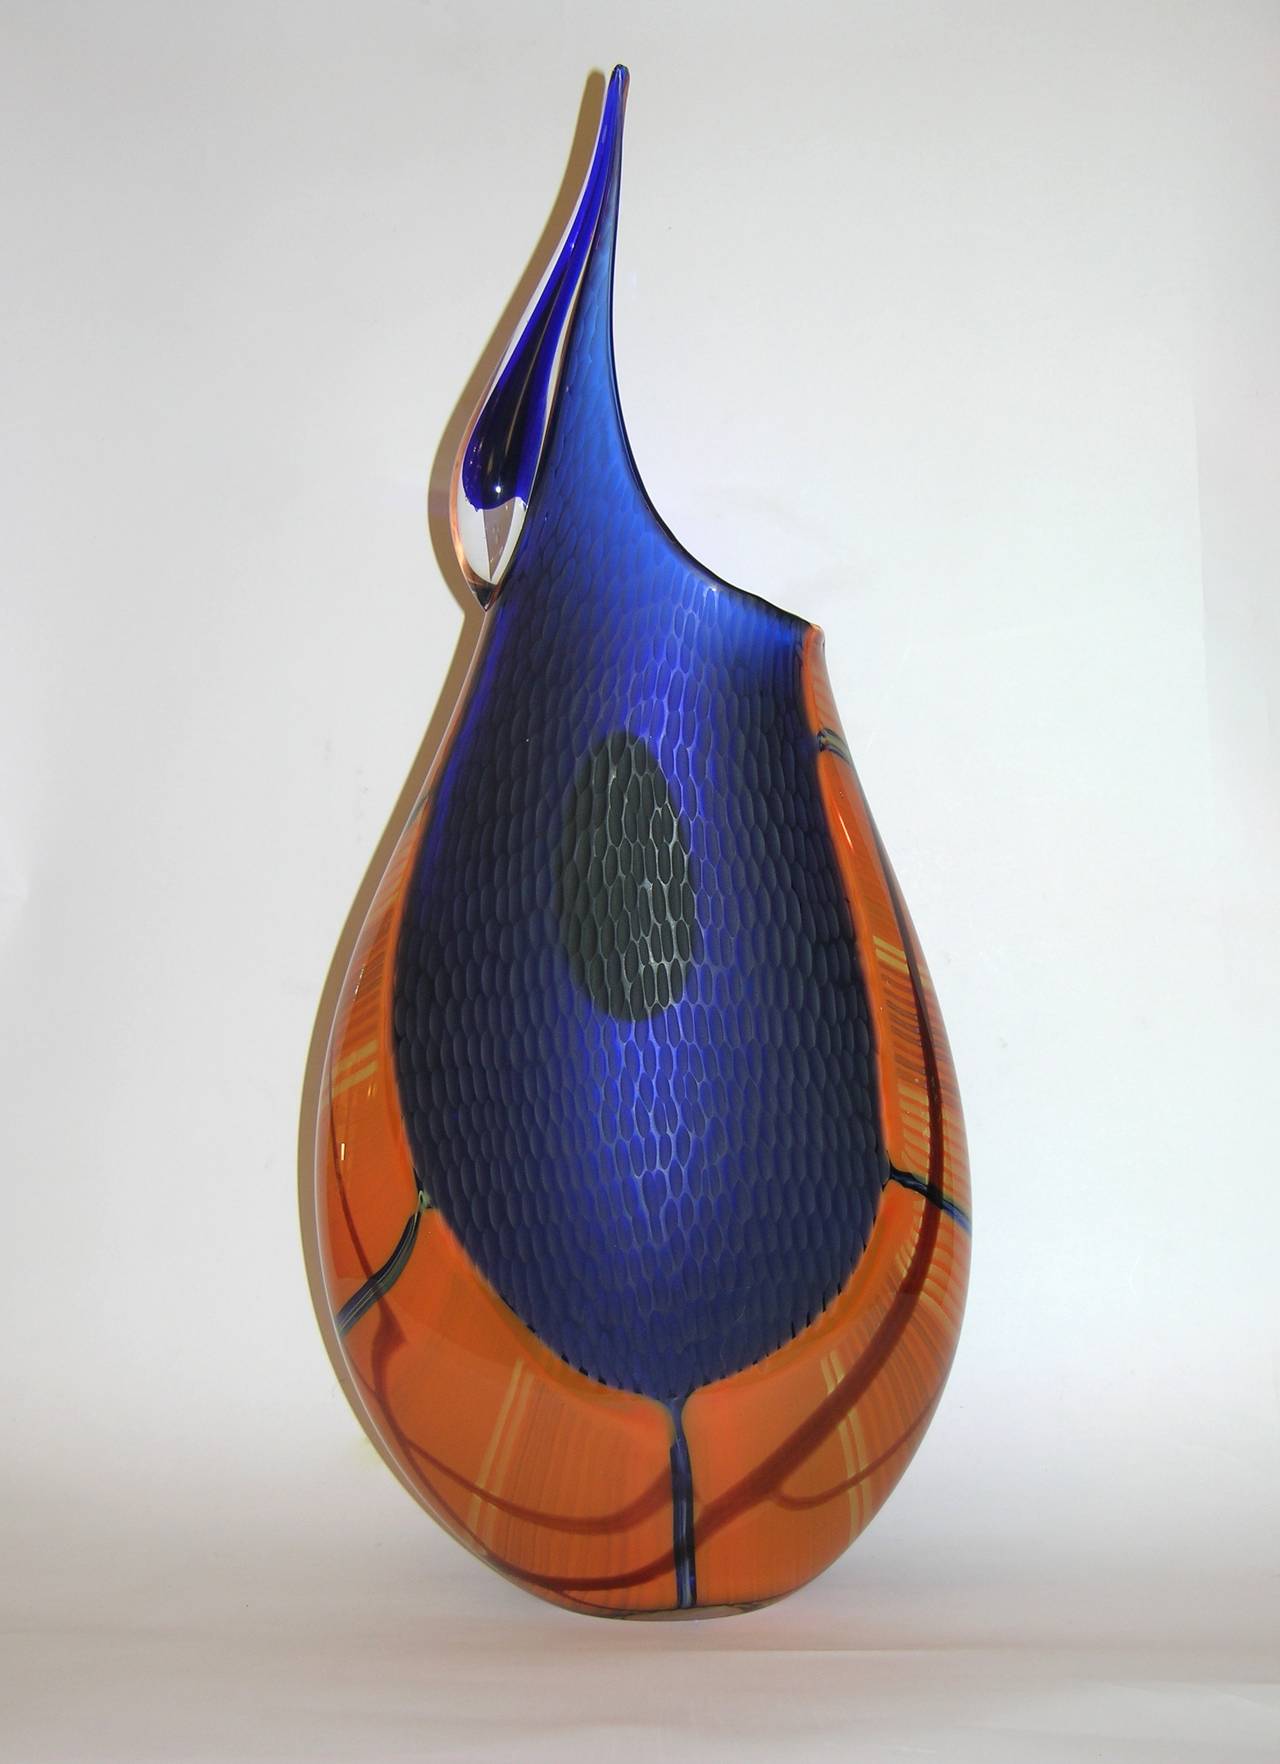 Contemporary work of art by Davide Dona' in blown Murano glass, this striking vase is beautifully overlaid in orange and blue and worked with a sophisticated enameled-like finish. The orange is decorated with elongated murrine and the blue sections